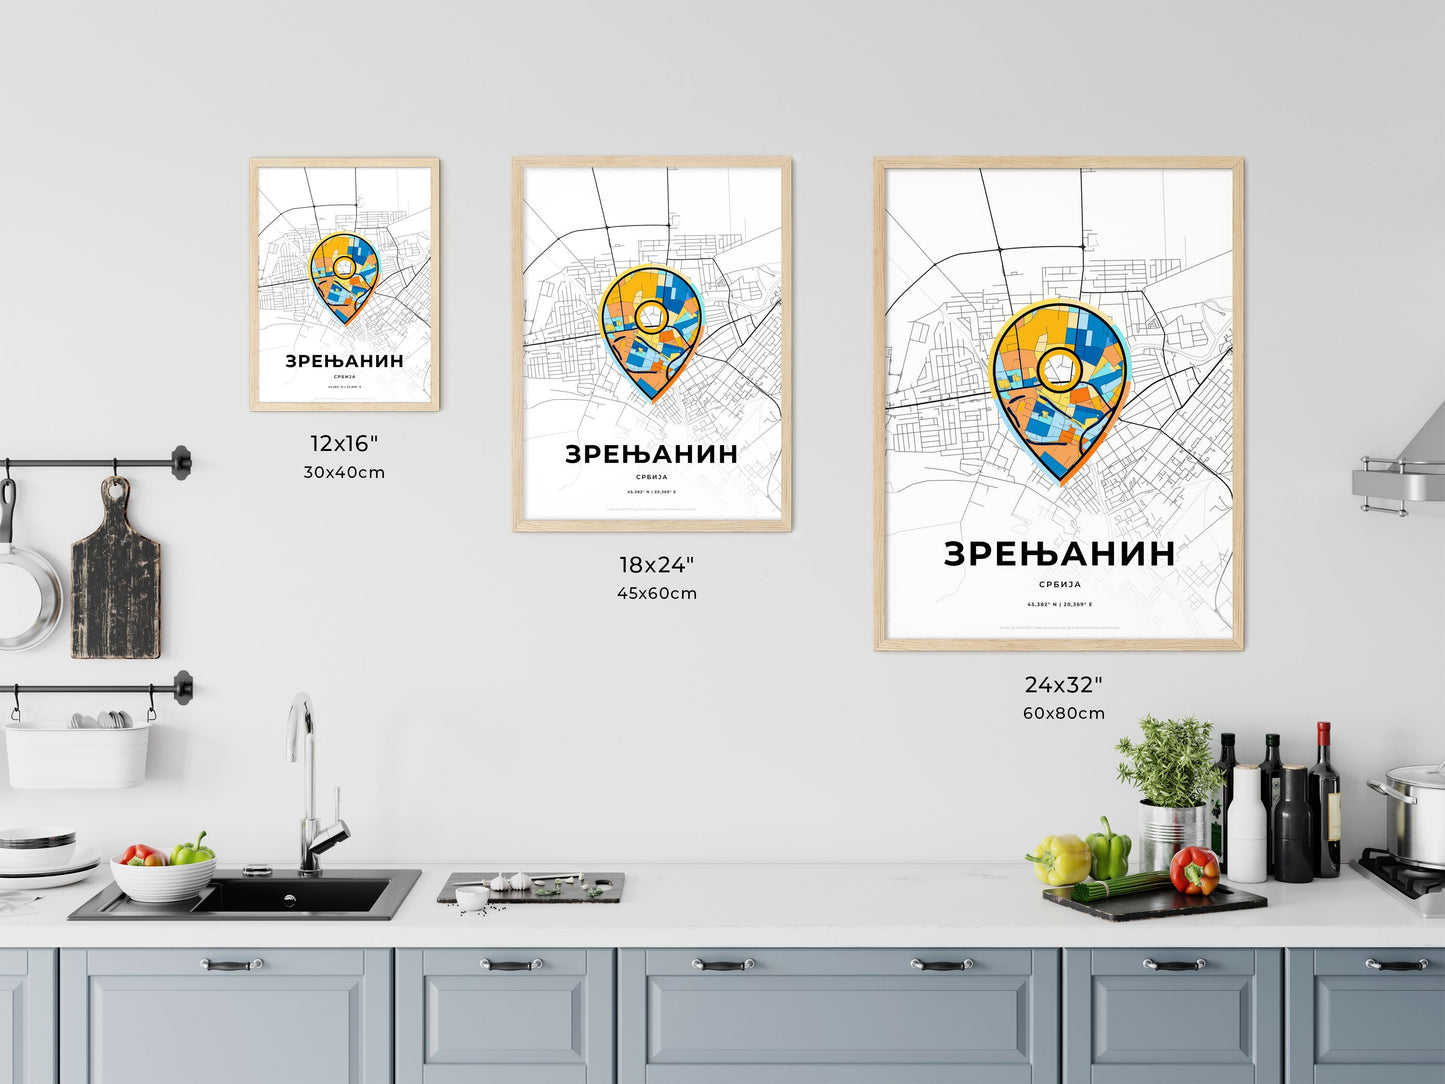 ZRENJANIN SERBIA minimal art map with a colorful icon. Where it all began, Couple map gift.